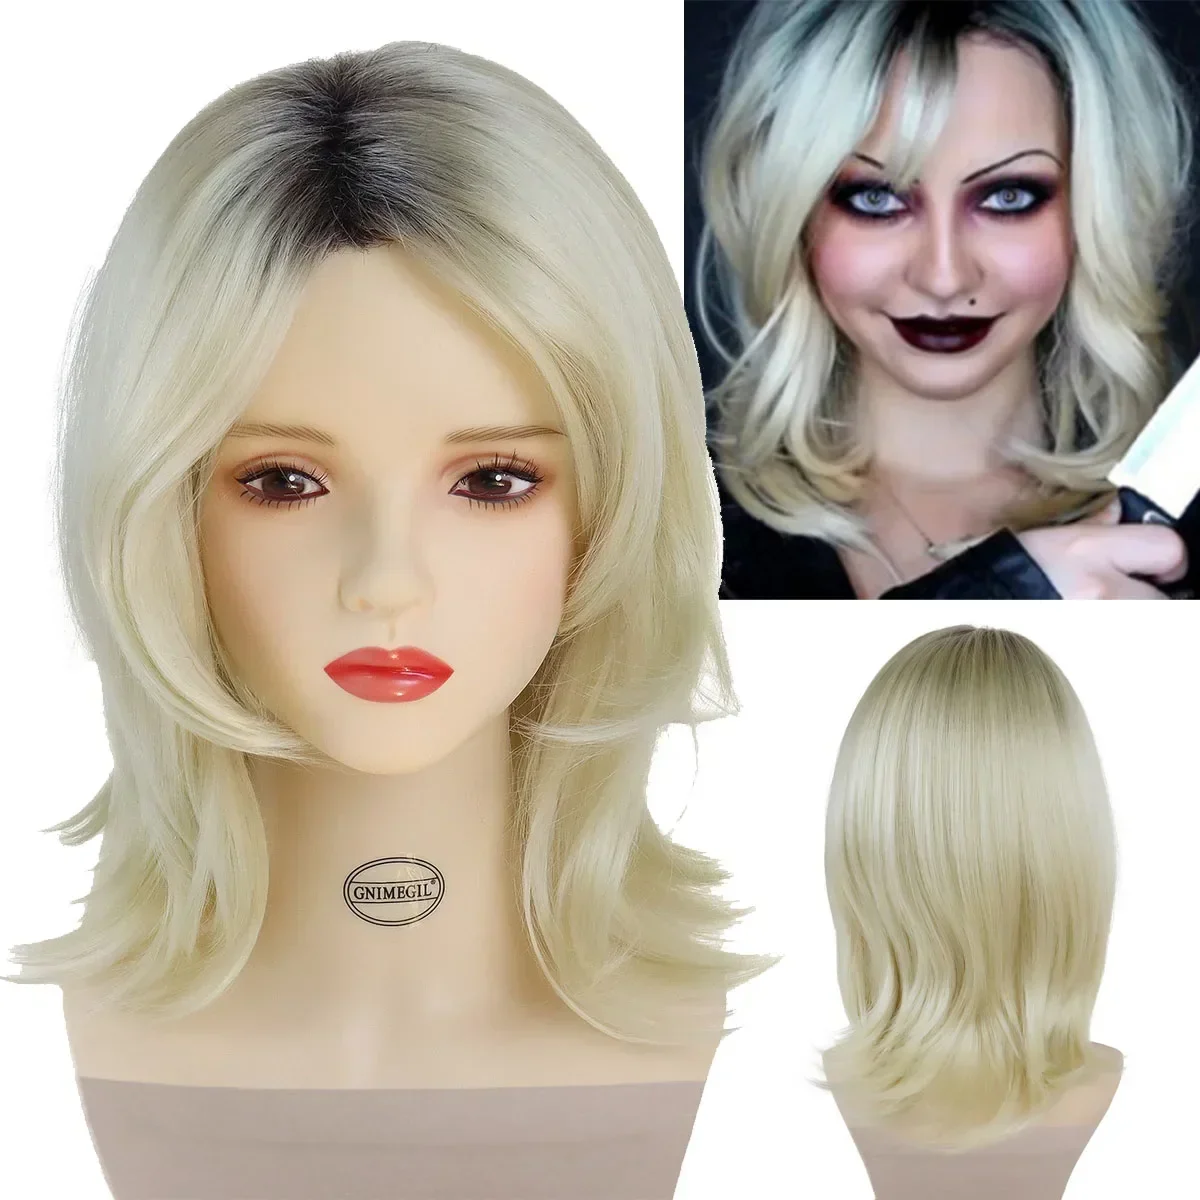 

GNIMEGIL Synthetic Halloween Bride of Chucky Blonde Omber Wig Long Wave Wigs for Women Middle Parting Jennifer Tilly Cosplay Wig